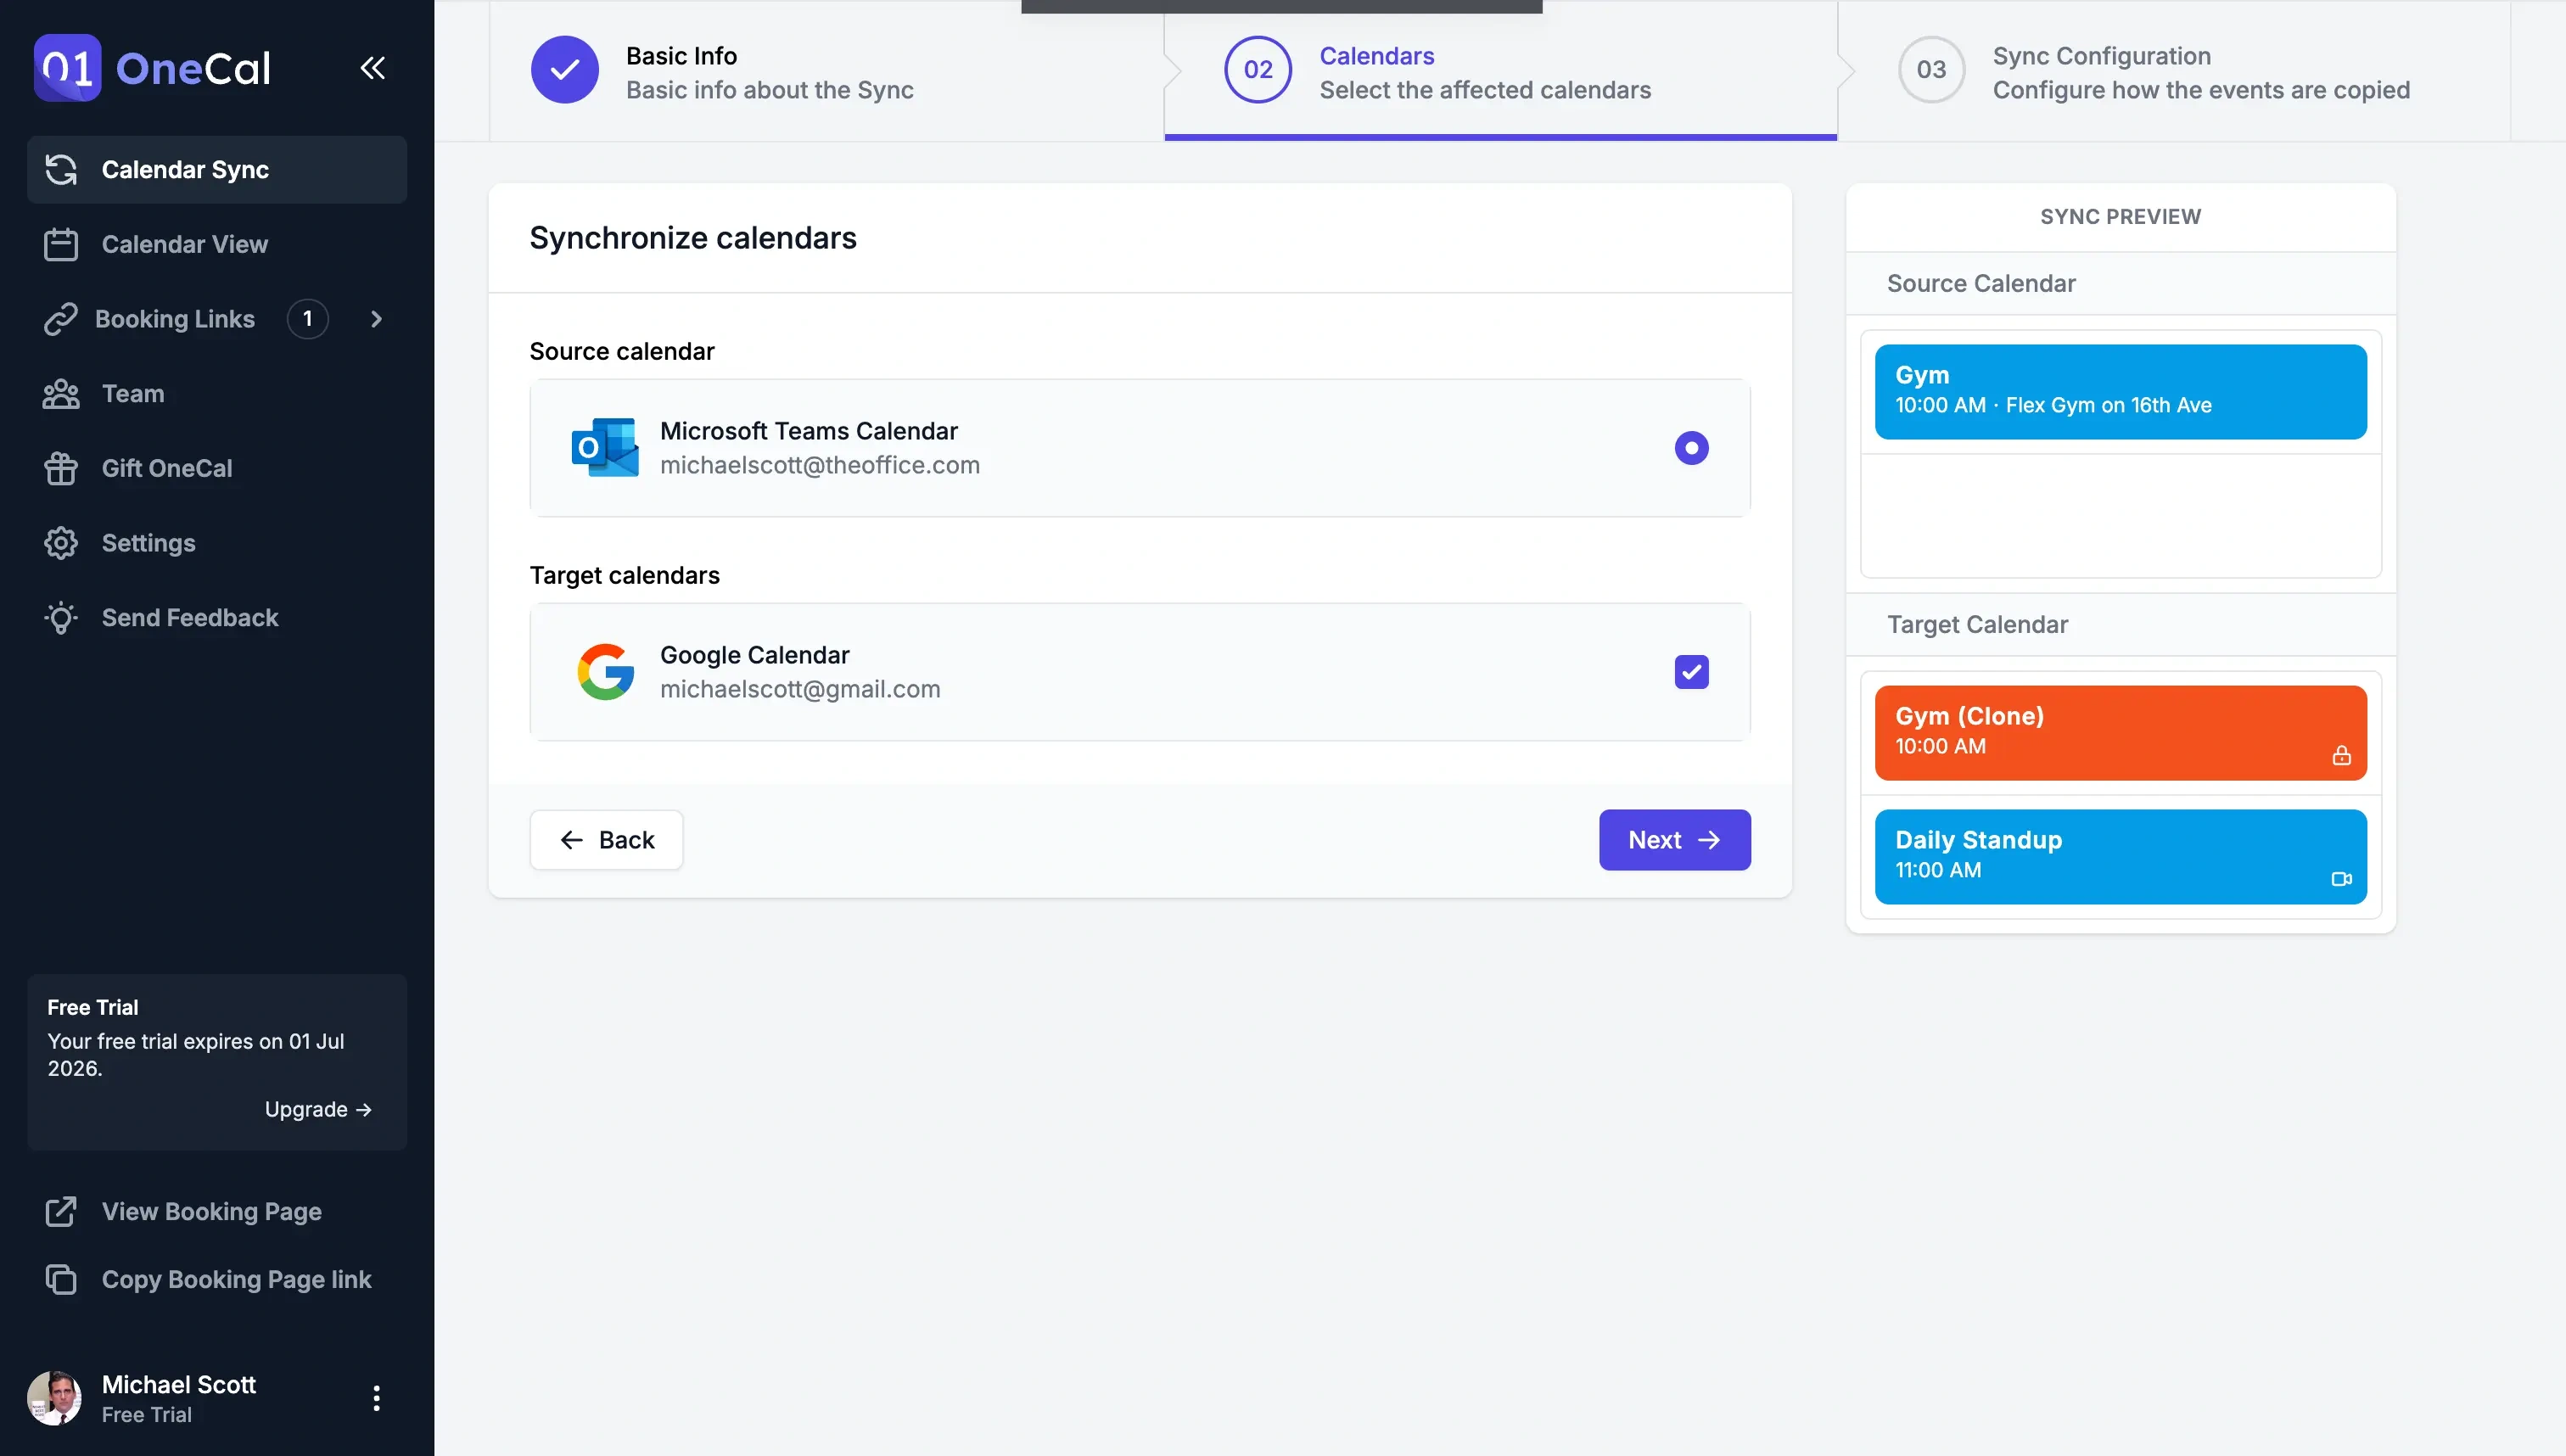 OneCal Dashboard - Select the Microsoft Teams and Google Calendar to sync